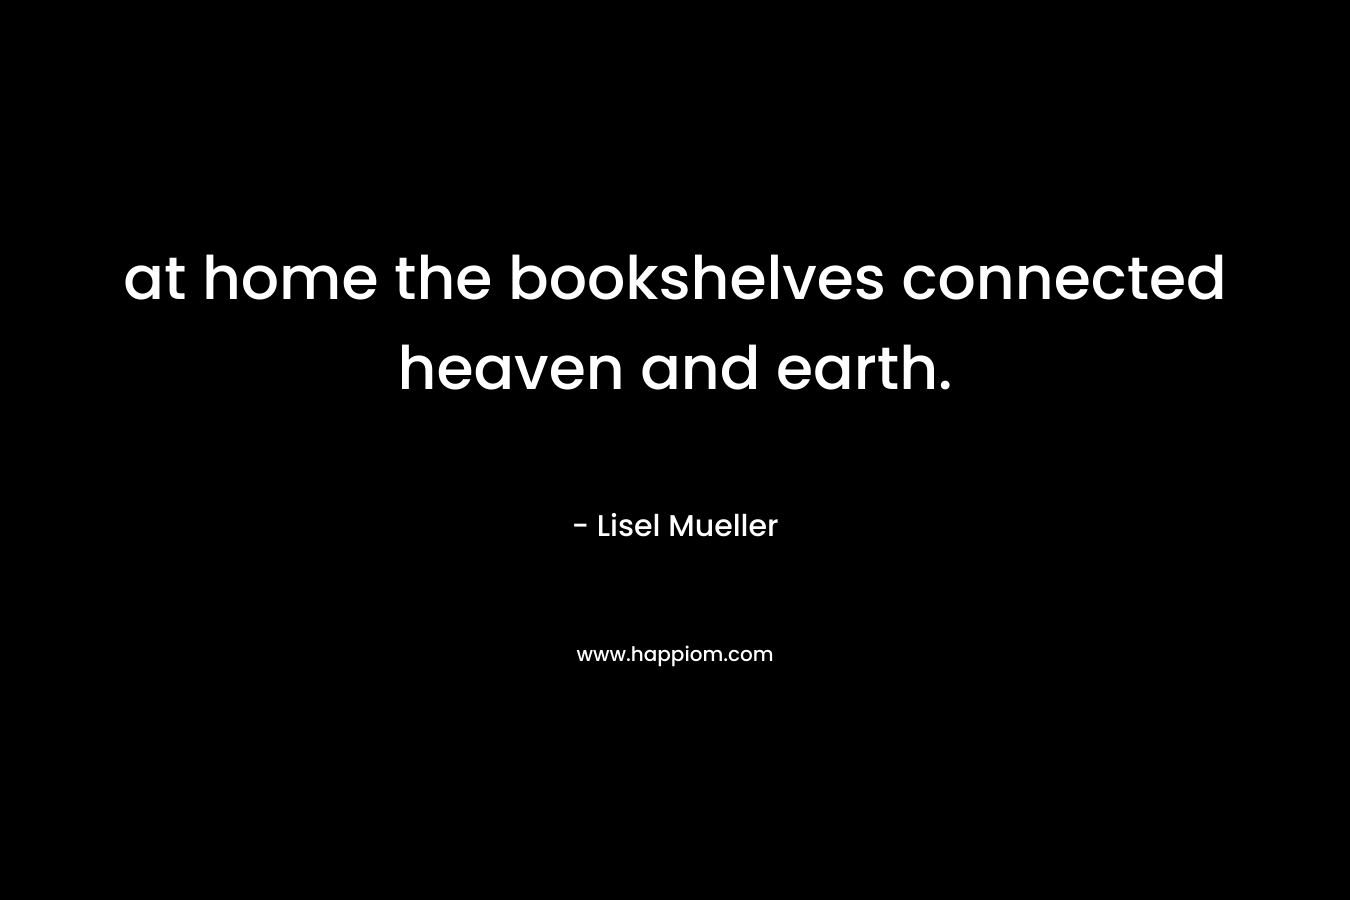 at home the bookshelves connected heaven and earth.